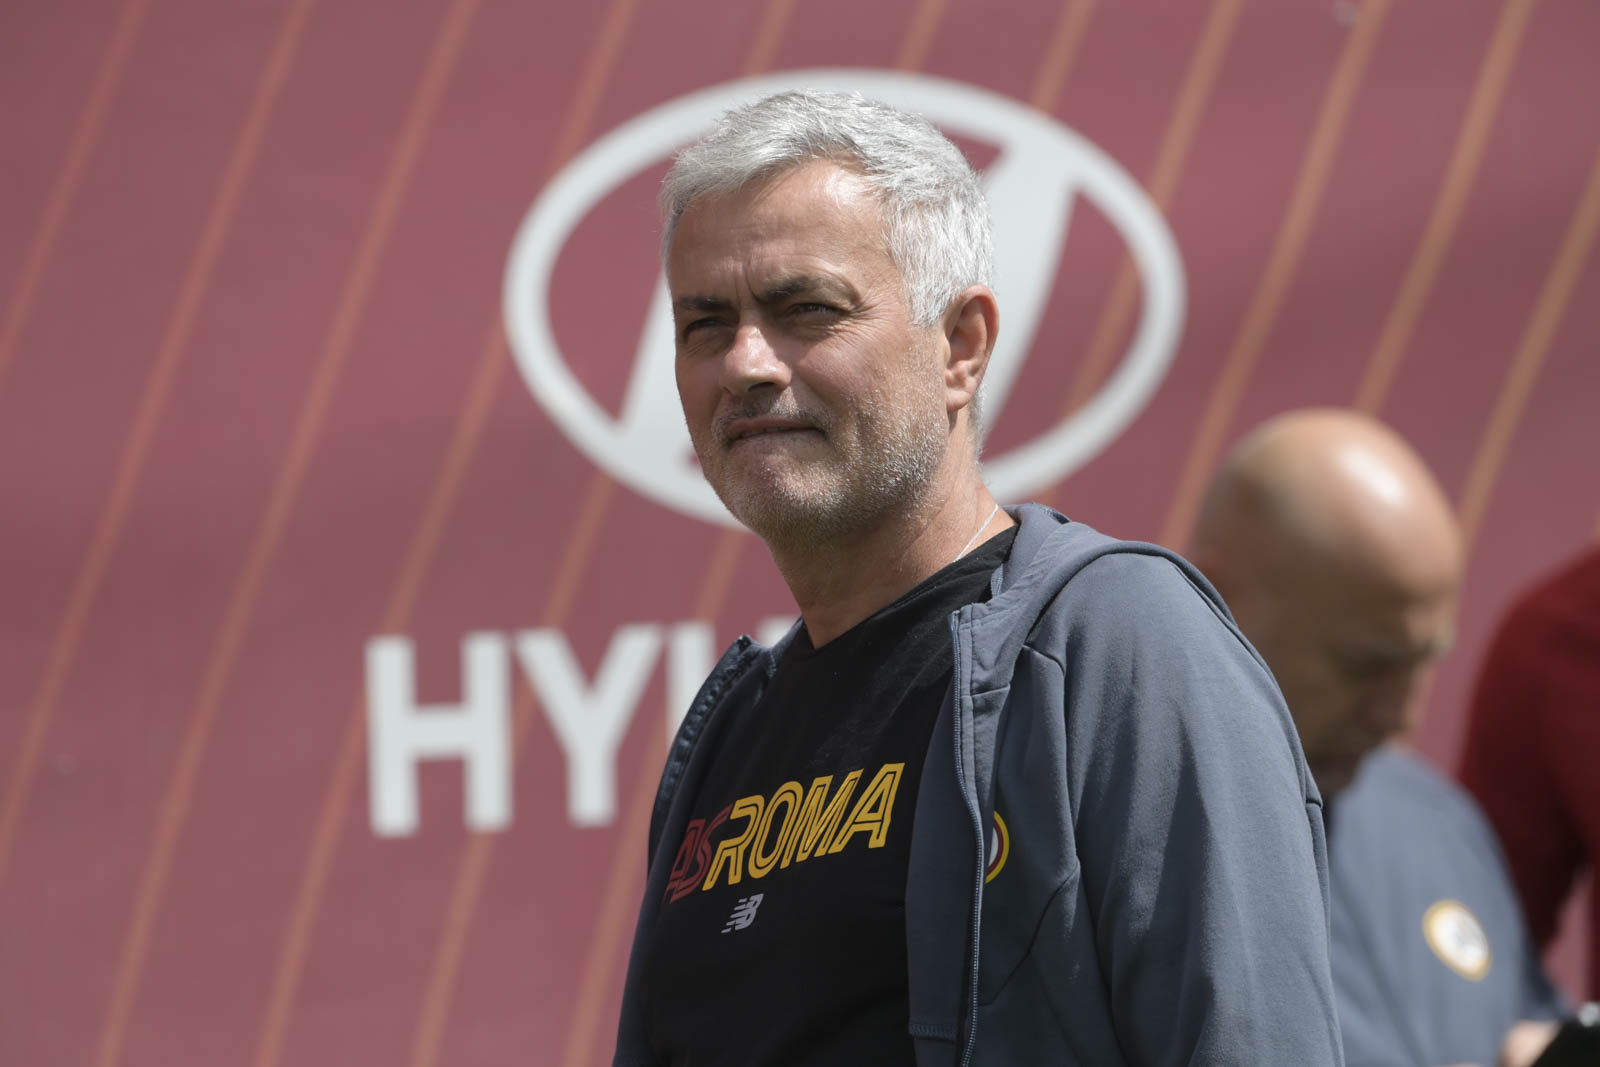 Have to tell my players don’t try to stay on your feet and be clowns, asserts Jose Mourinho